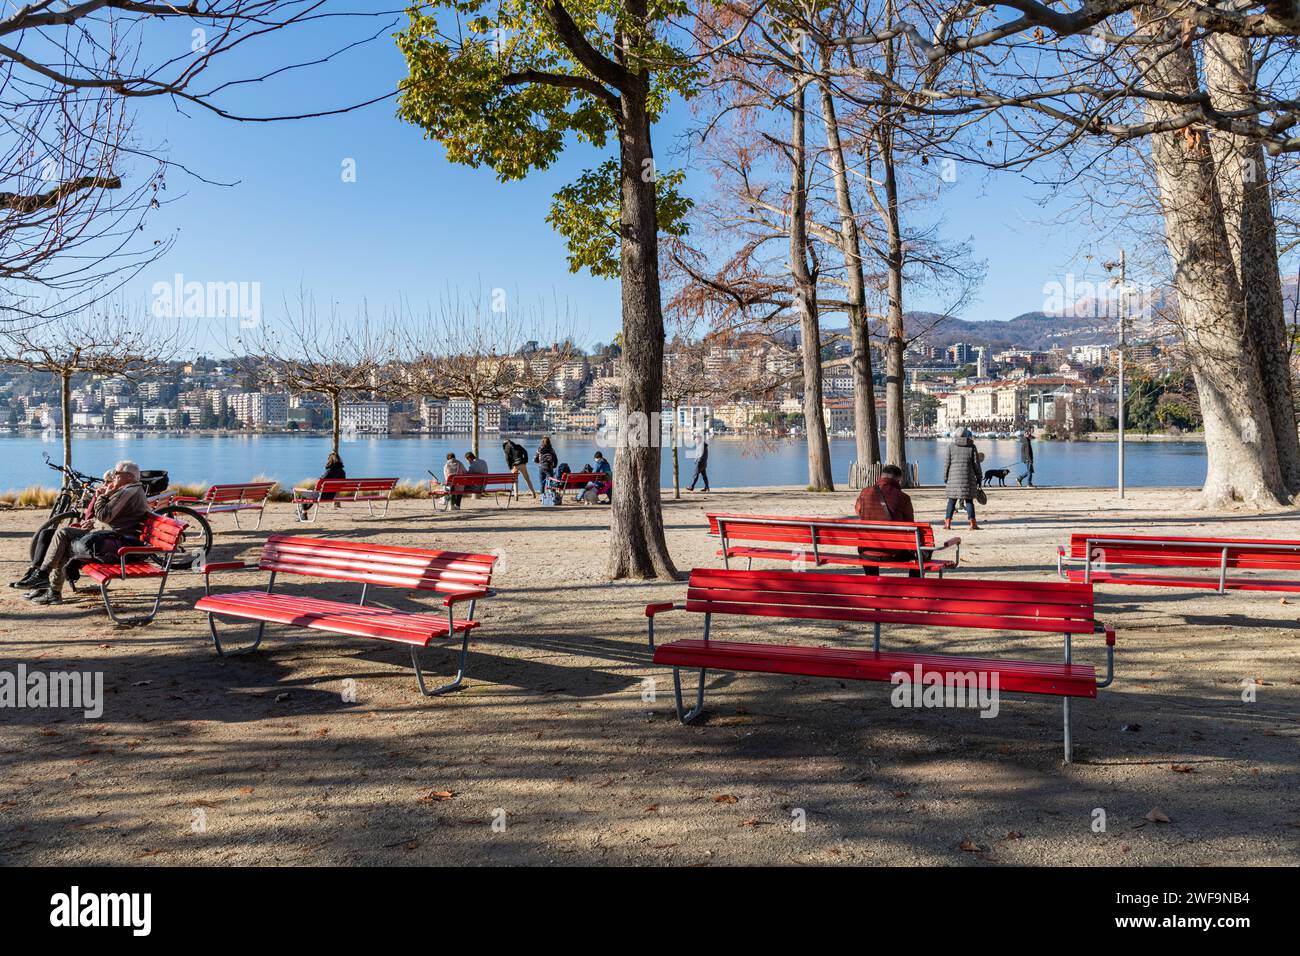 People sat on benches in a park by Lake Lugano in Switzerland Stock Photo